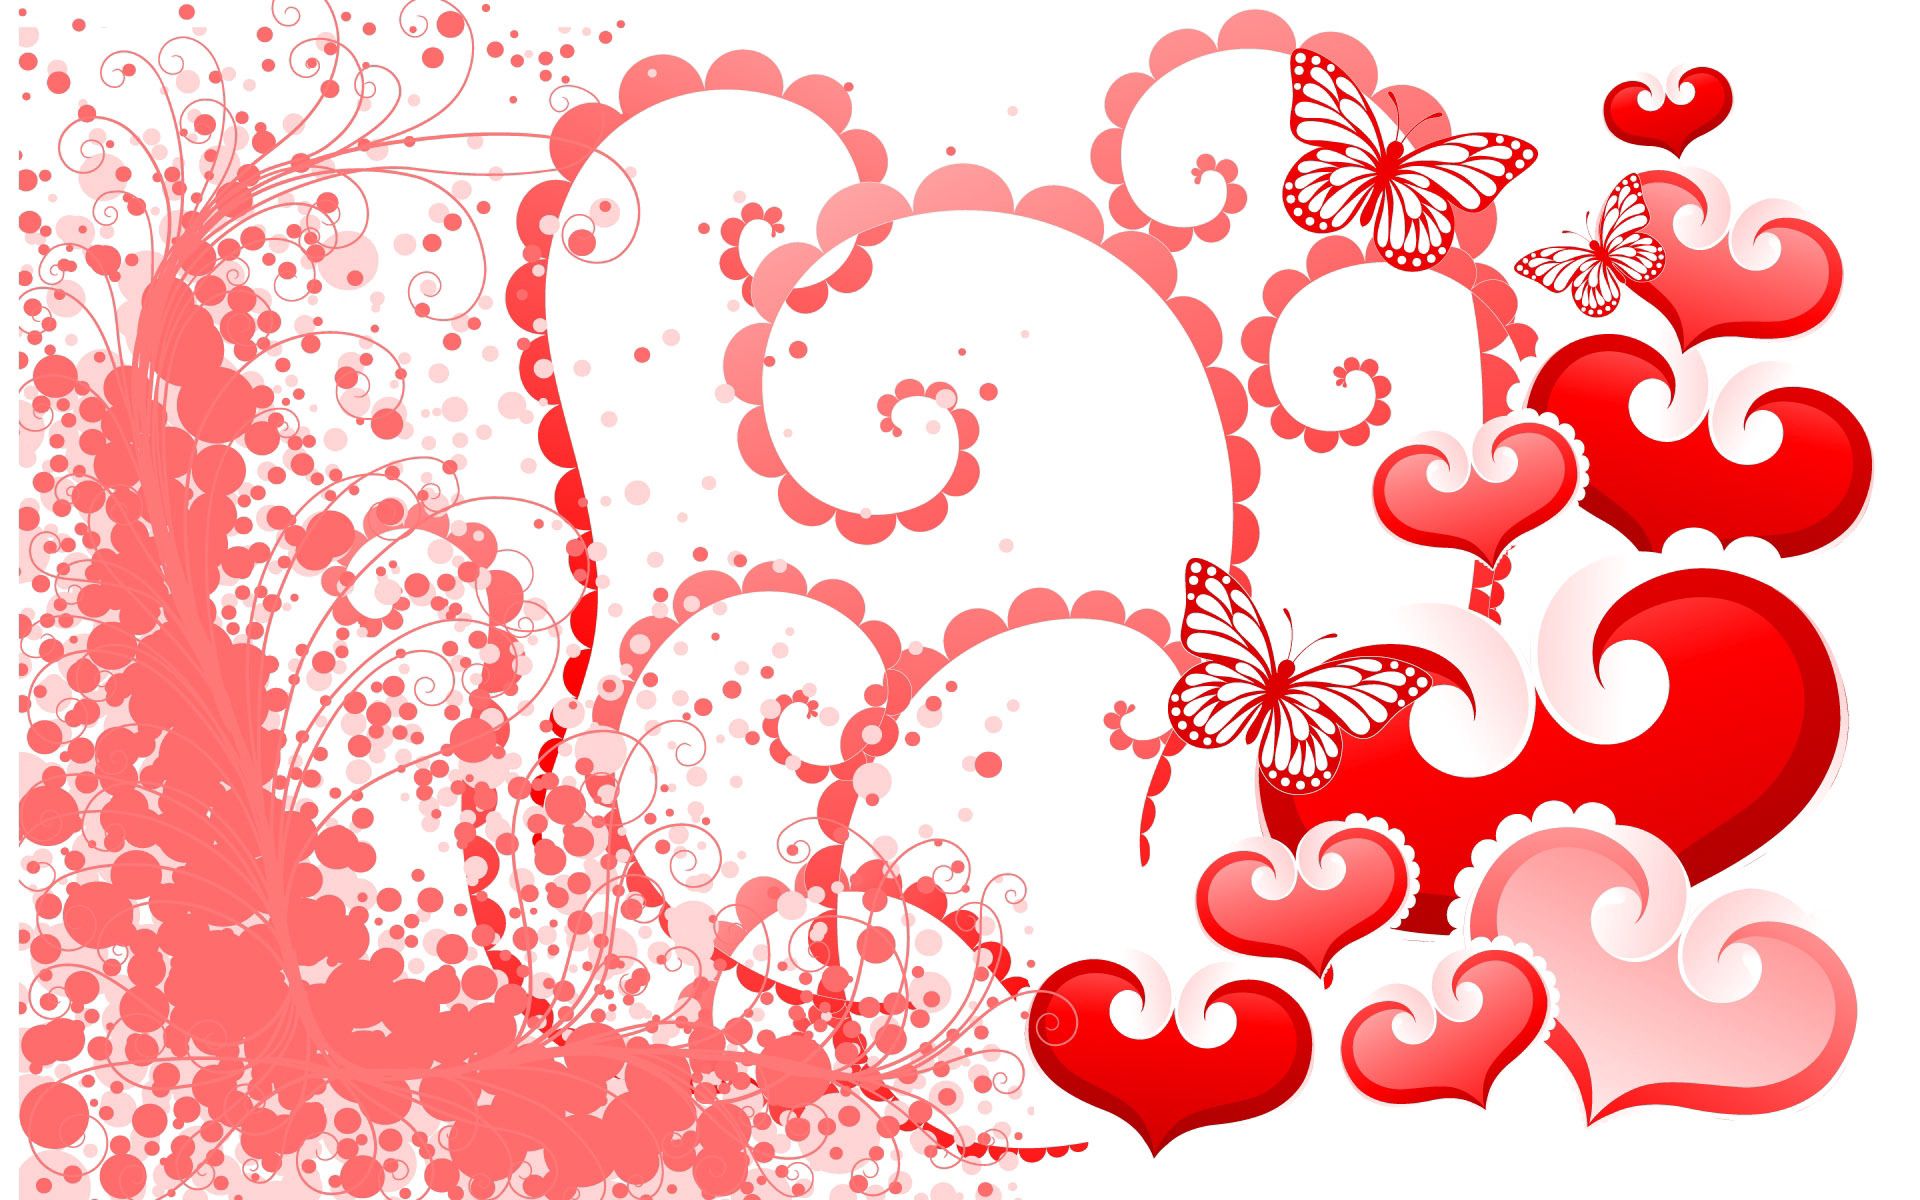 butterflies, holidays, background, hearts, valentine's day